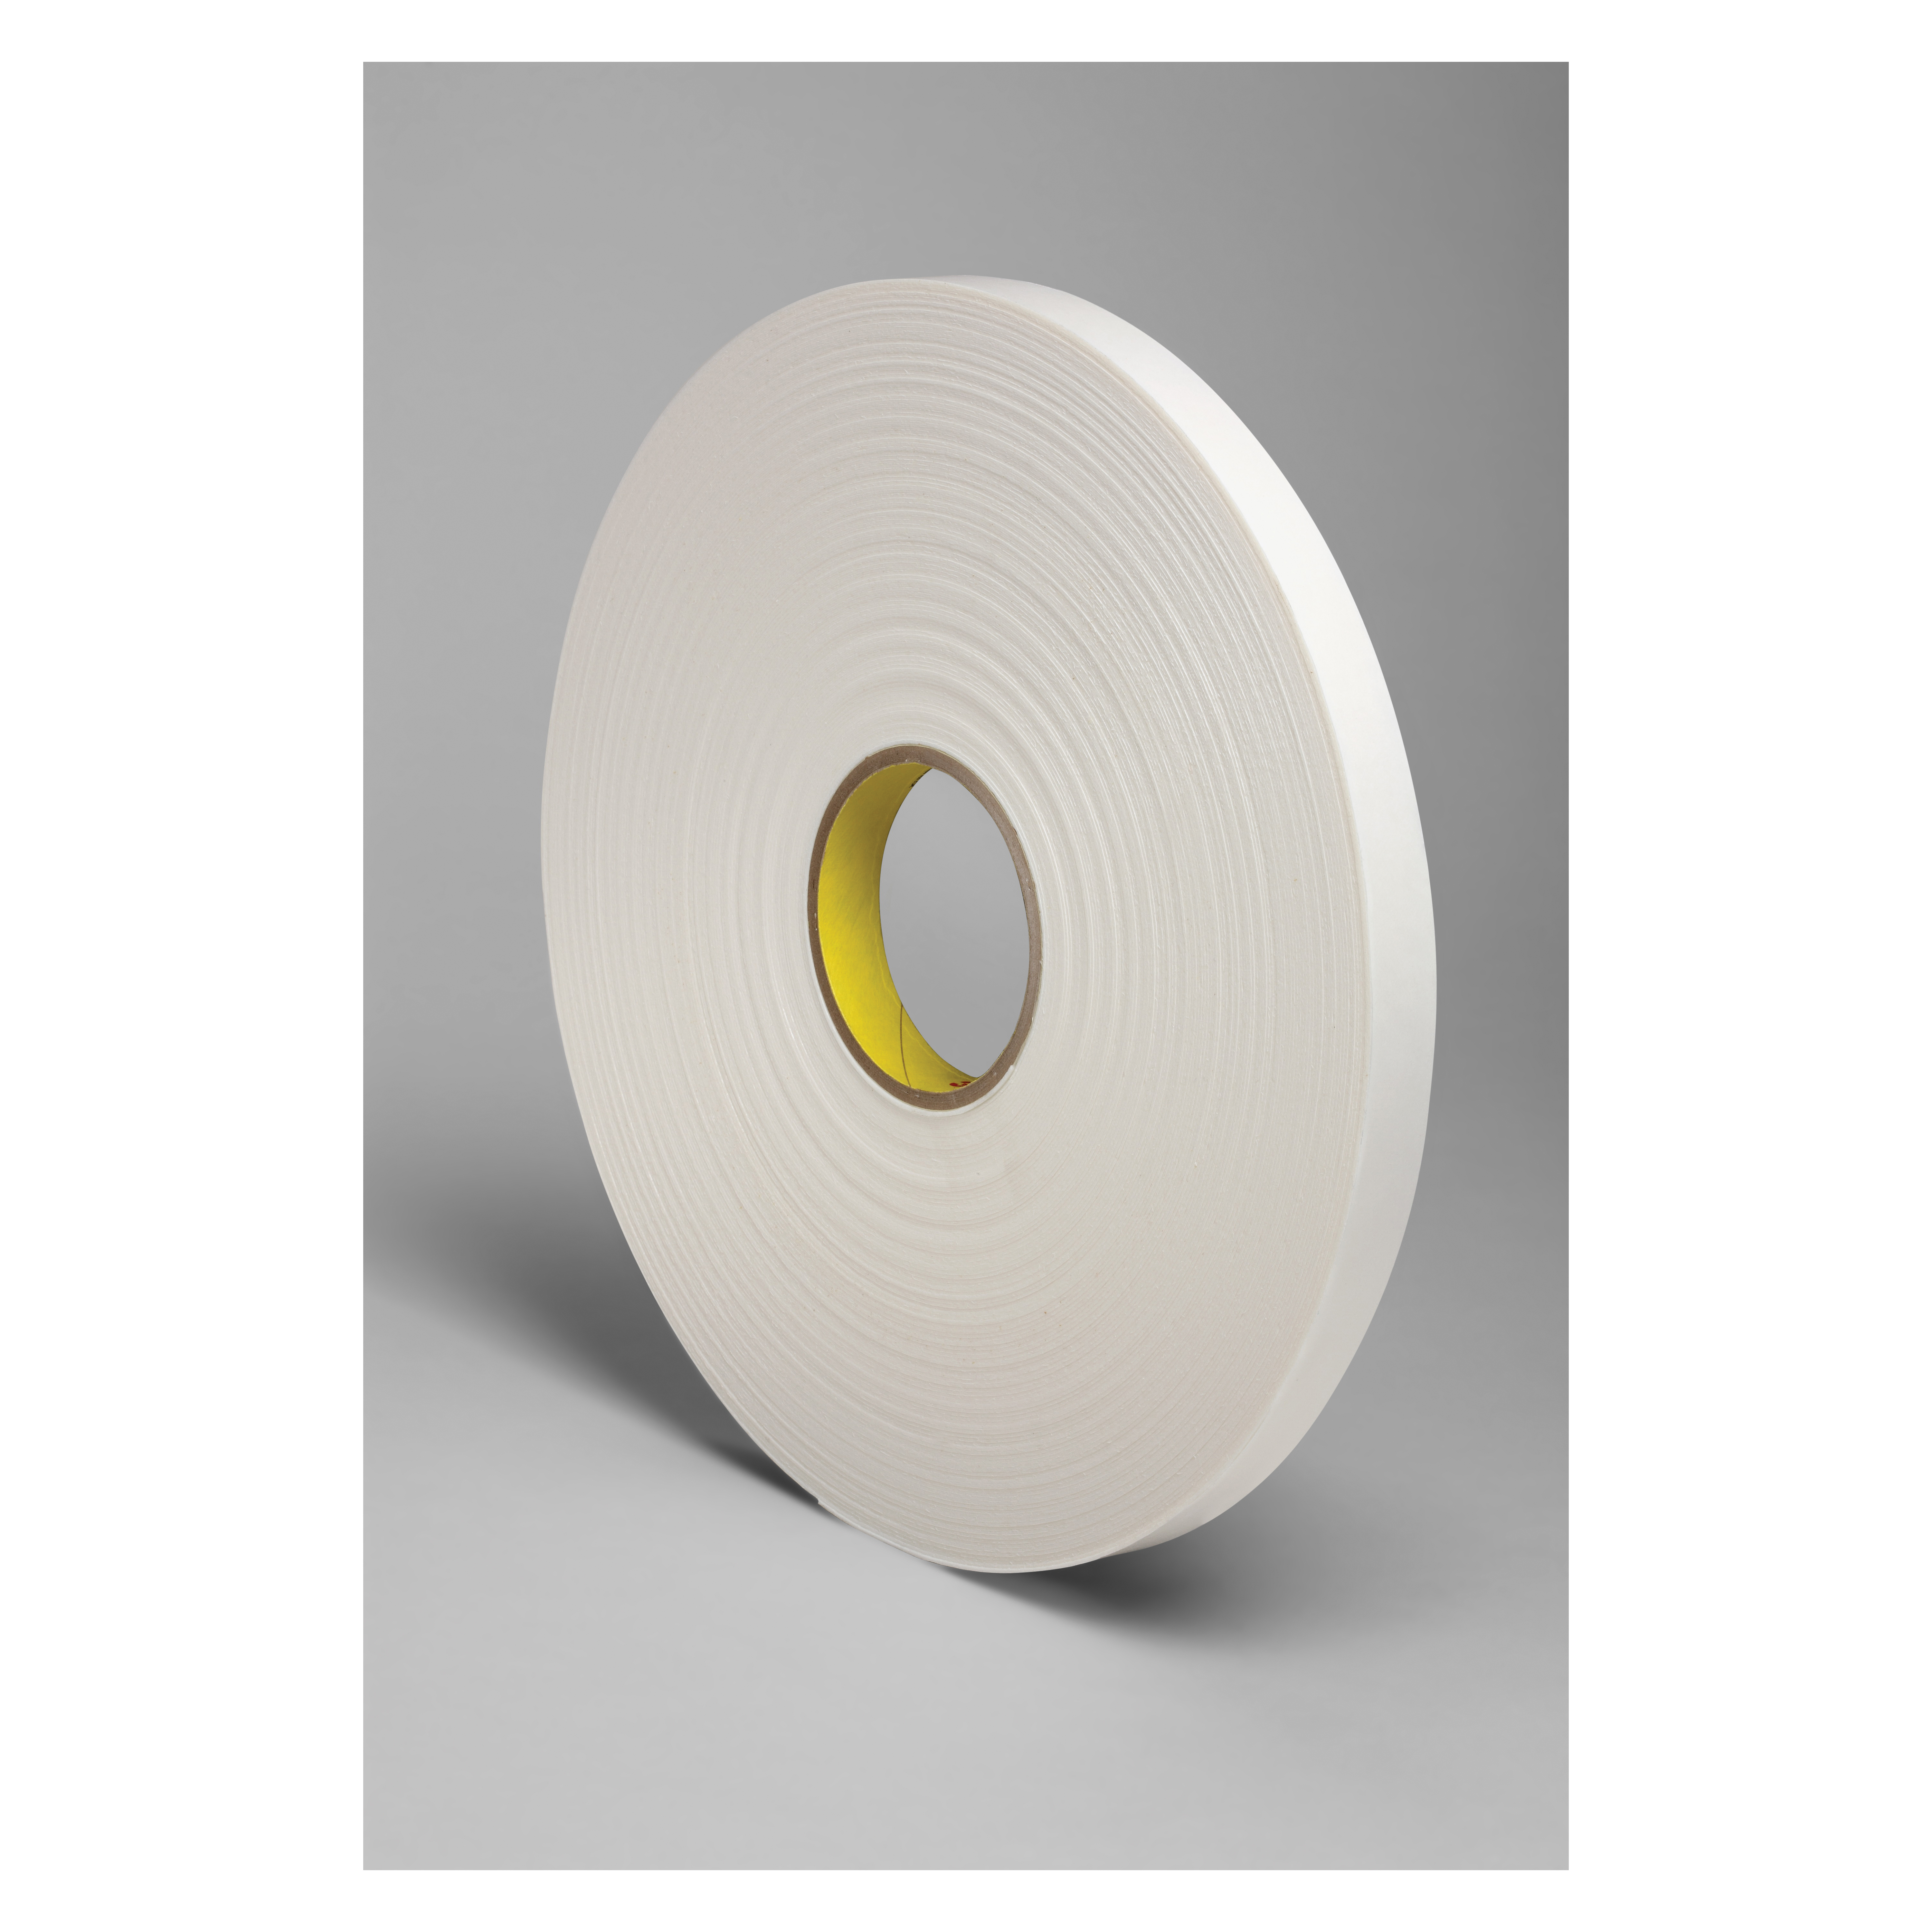 3M™ 021200-03414 Single Coated Foam Tape, 18 yd L x 1 in W, 250 mil THK, Acrylic Adhesive, Urethane Foam Backing, Natural